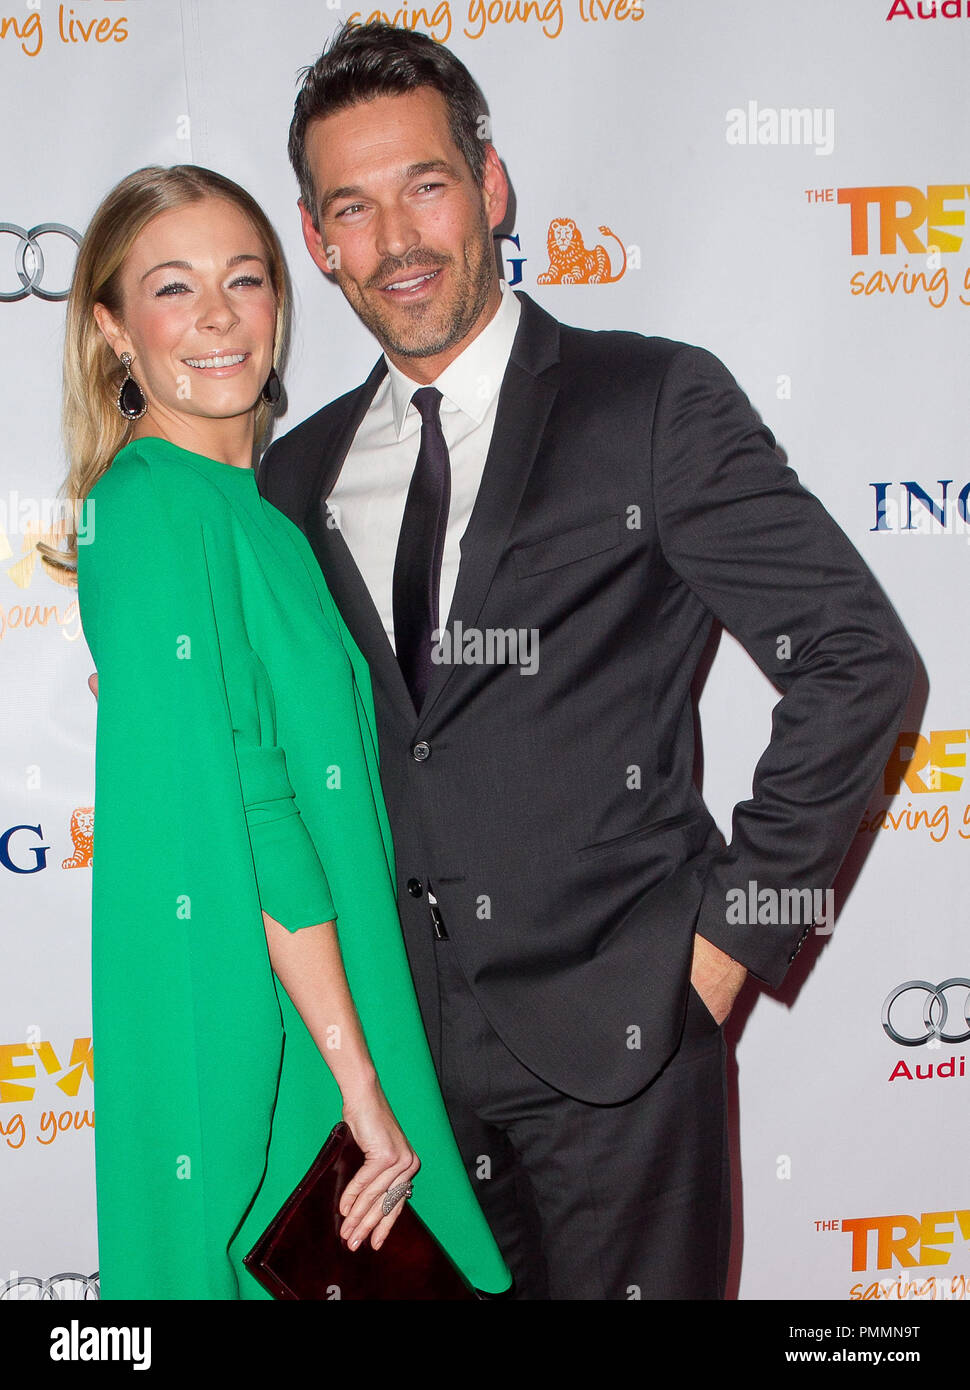 LeAnn Rimes & Eddie Cibrian at The Trevor Project's 2011 Trevor Live! held at The Hollywood Palladium in Hollywood, CA. The event took place on Sunday, December 4, 2011. Photo by Eden Ari/ PRPP/ PictureLux Stock Photo